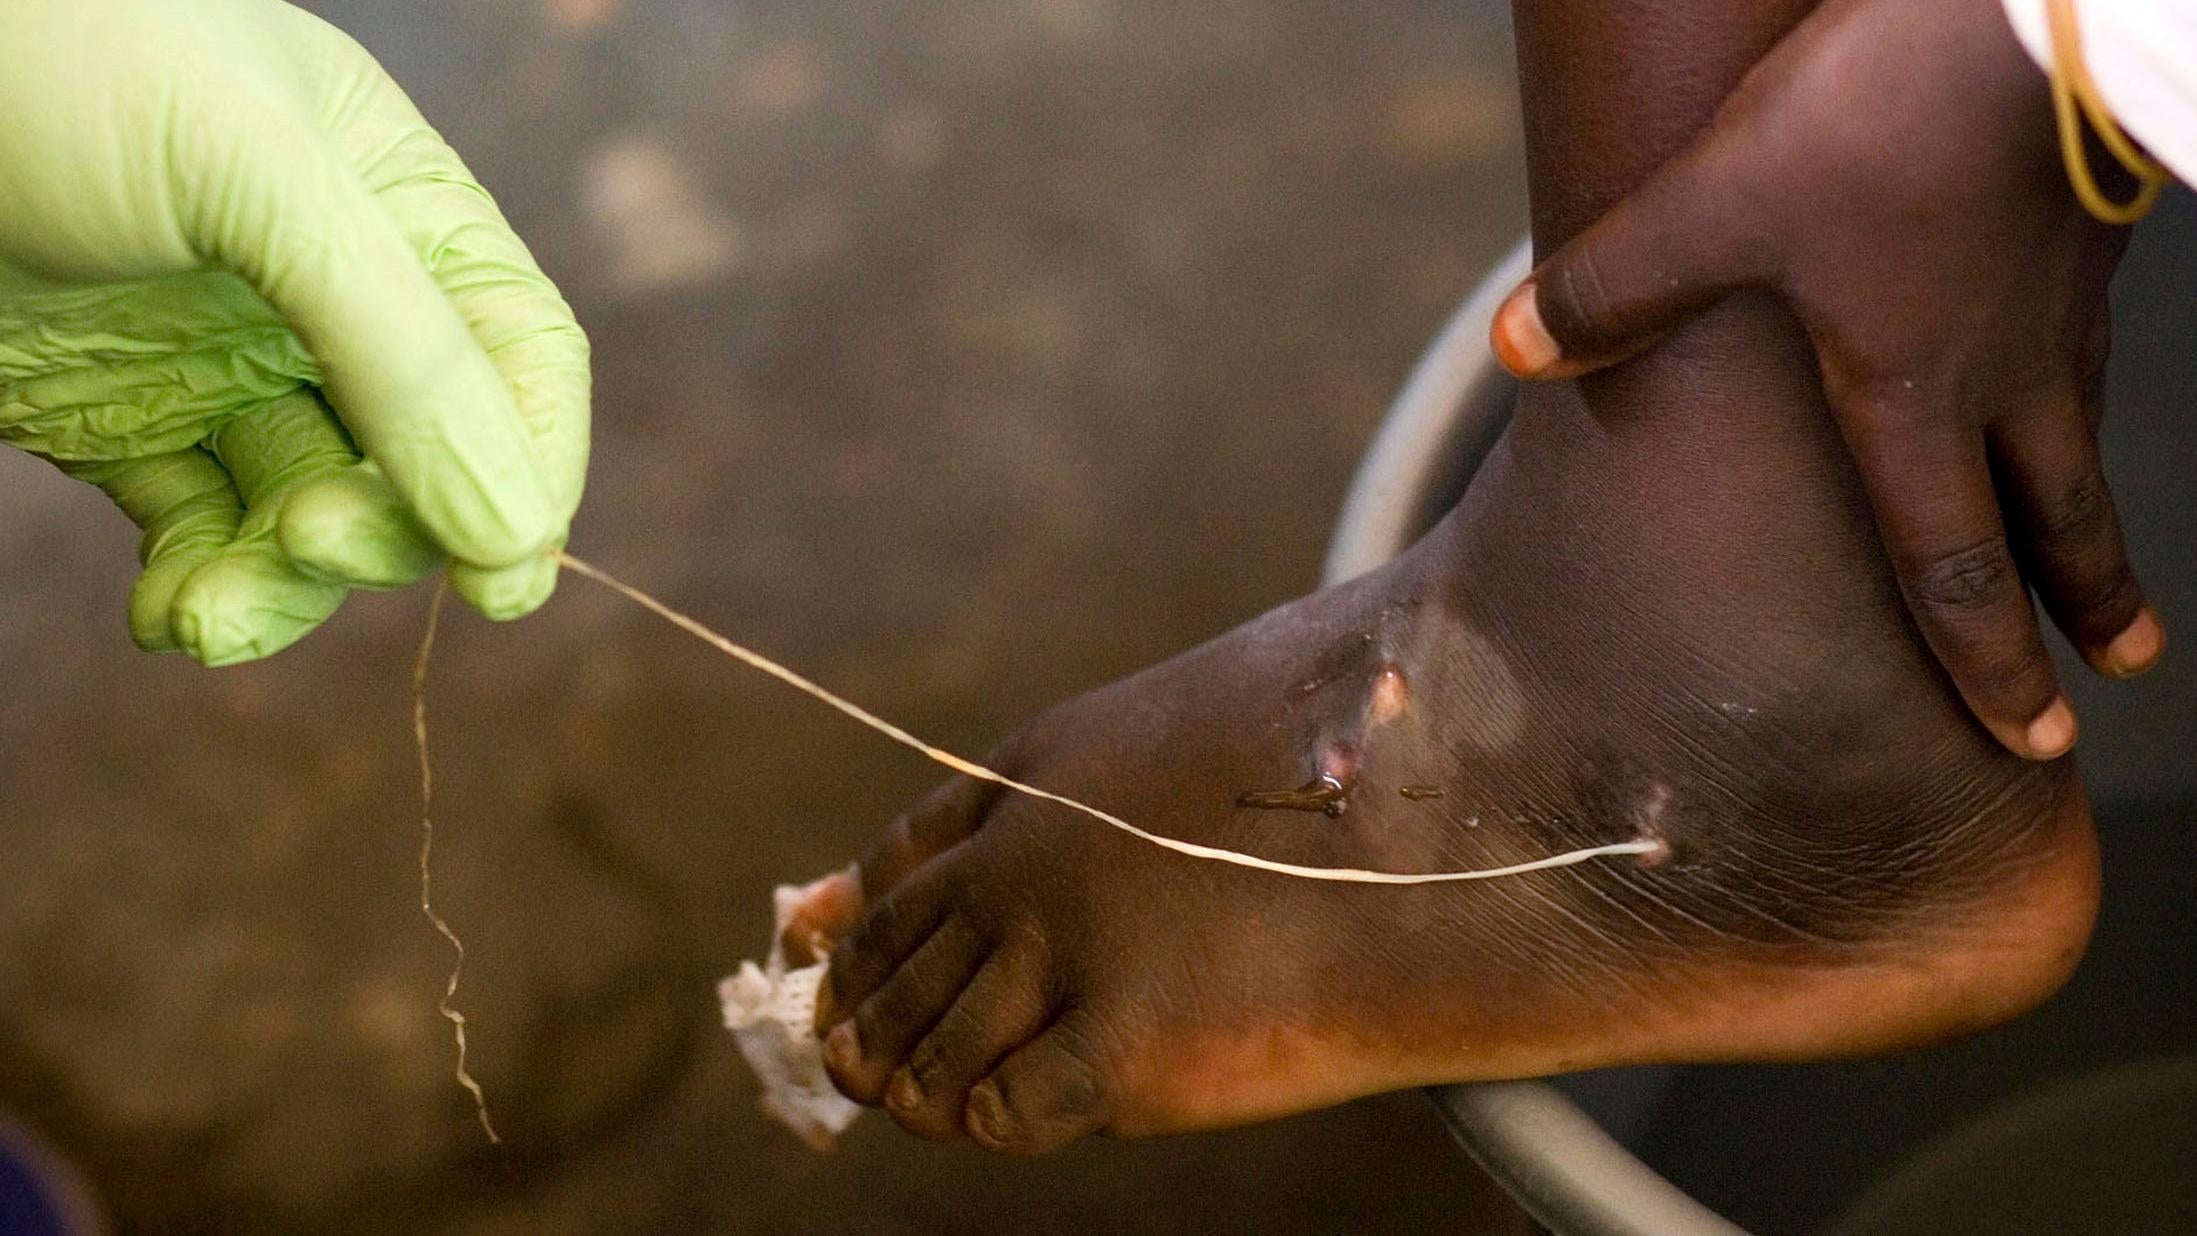 A Guinea worm being extracted from a child's foot at a containment centre in Savelugu, Ghana in a March 2007 photo. The worm found in the Vietnam case was a related species, possibly native to reptiles. (Photo: Olivier Asselin, AP)